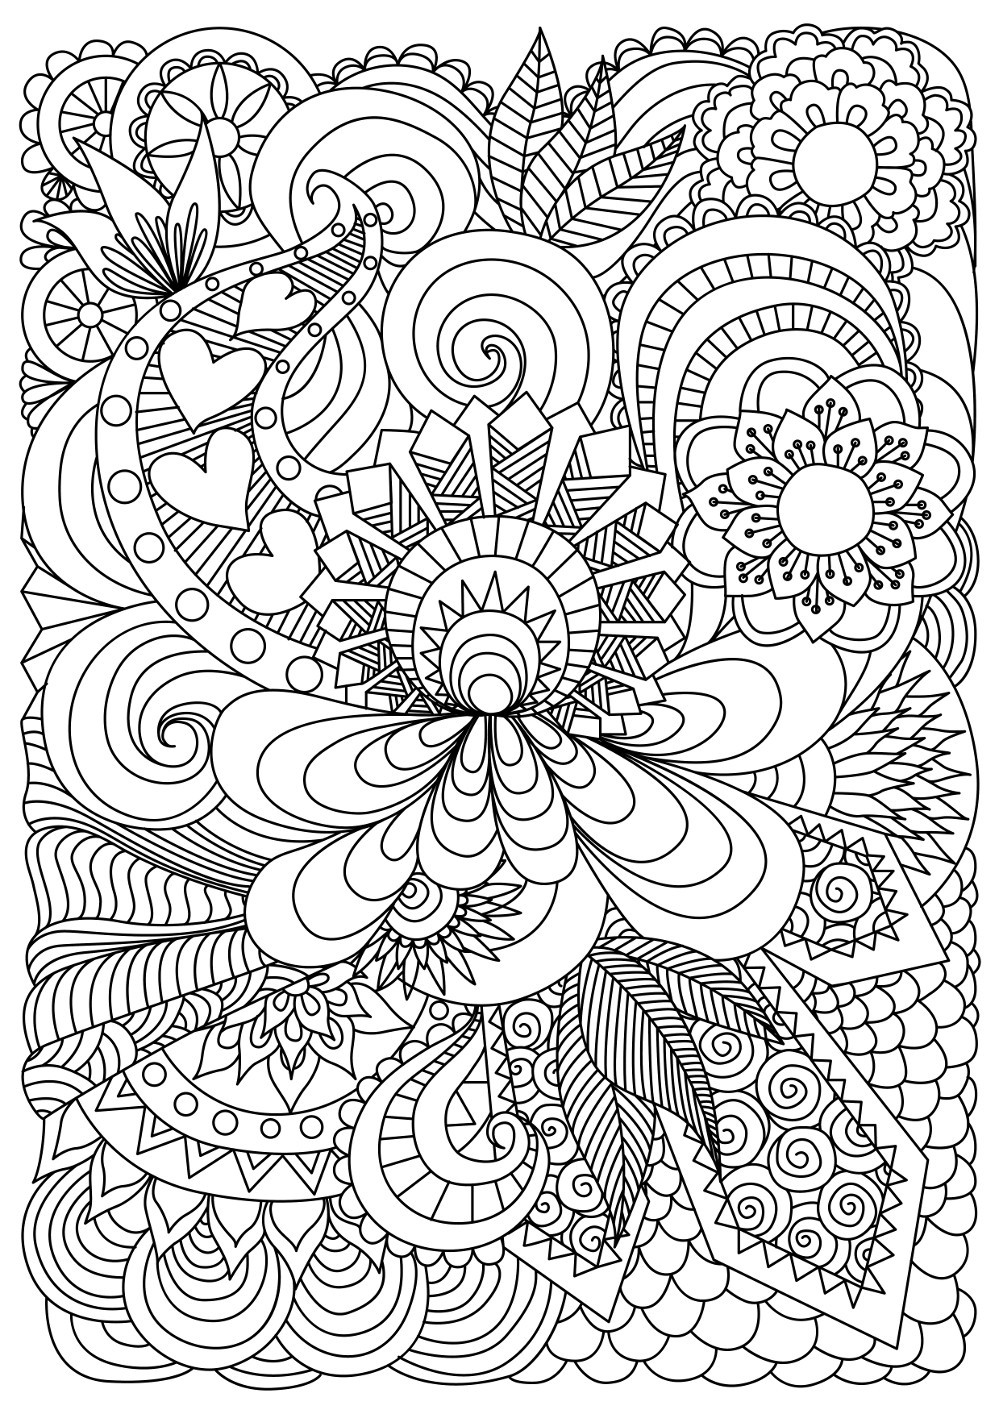 Adult Coloring Book Images
 37 Best Adults Coloring Pages Updated 2018